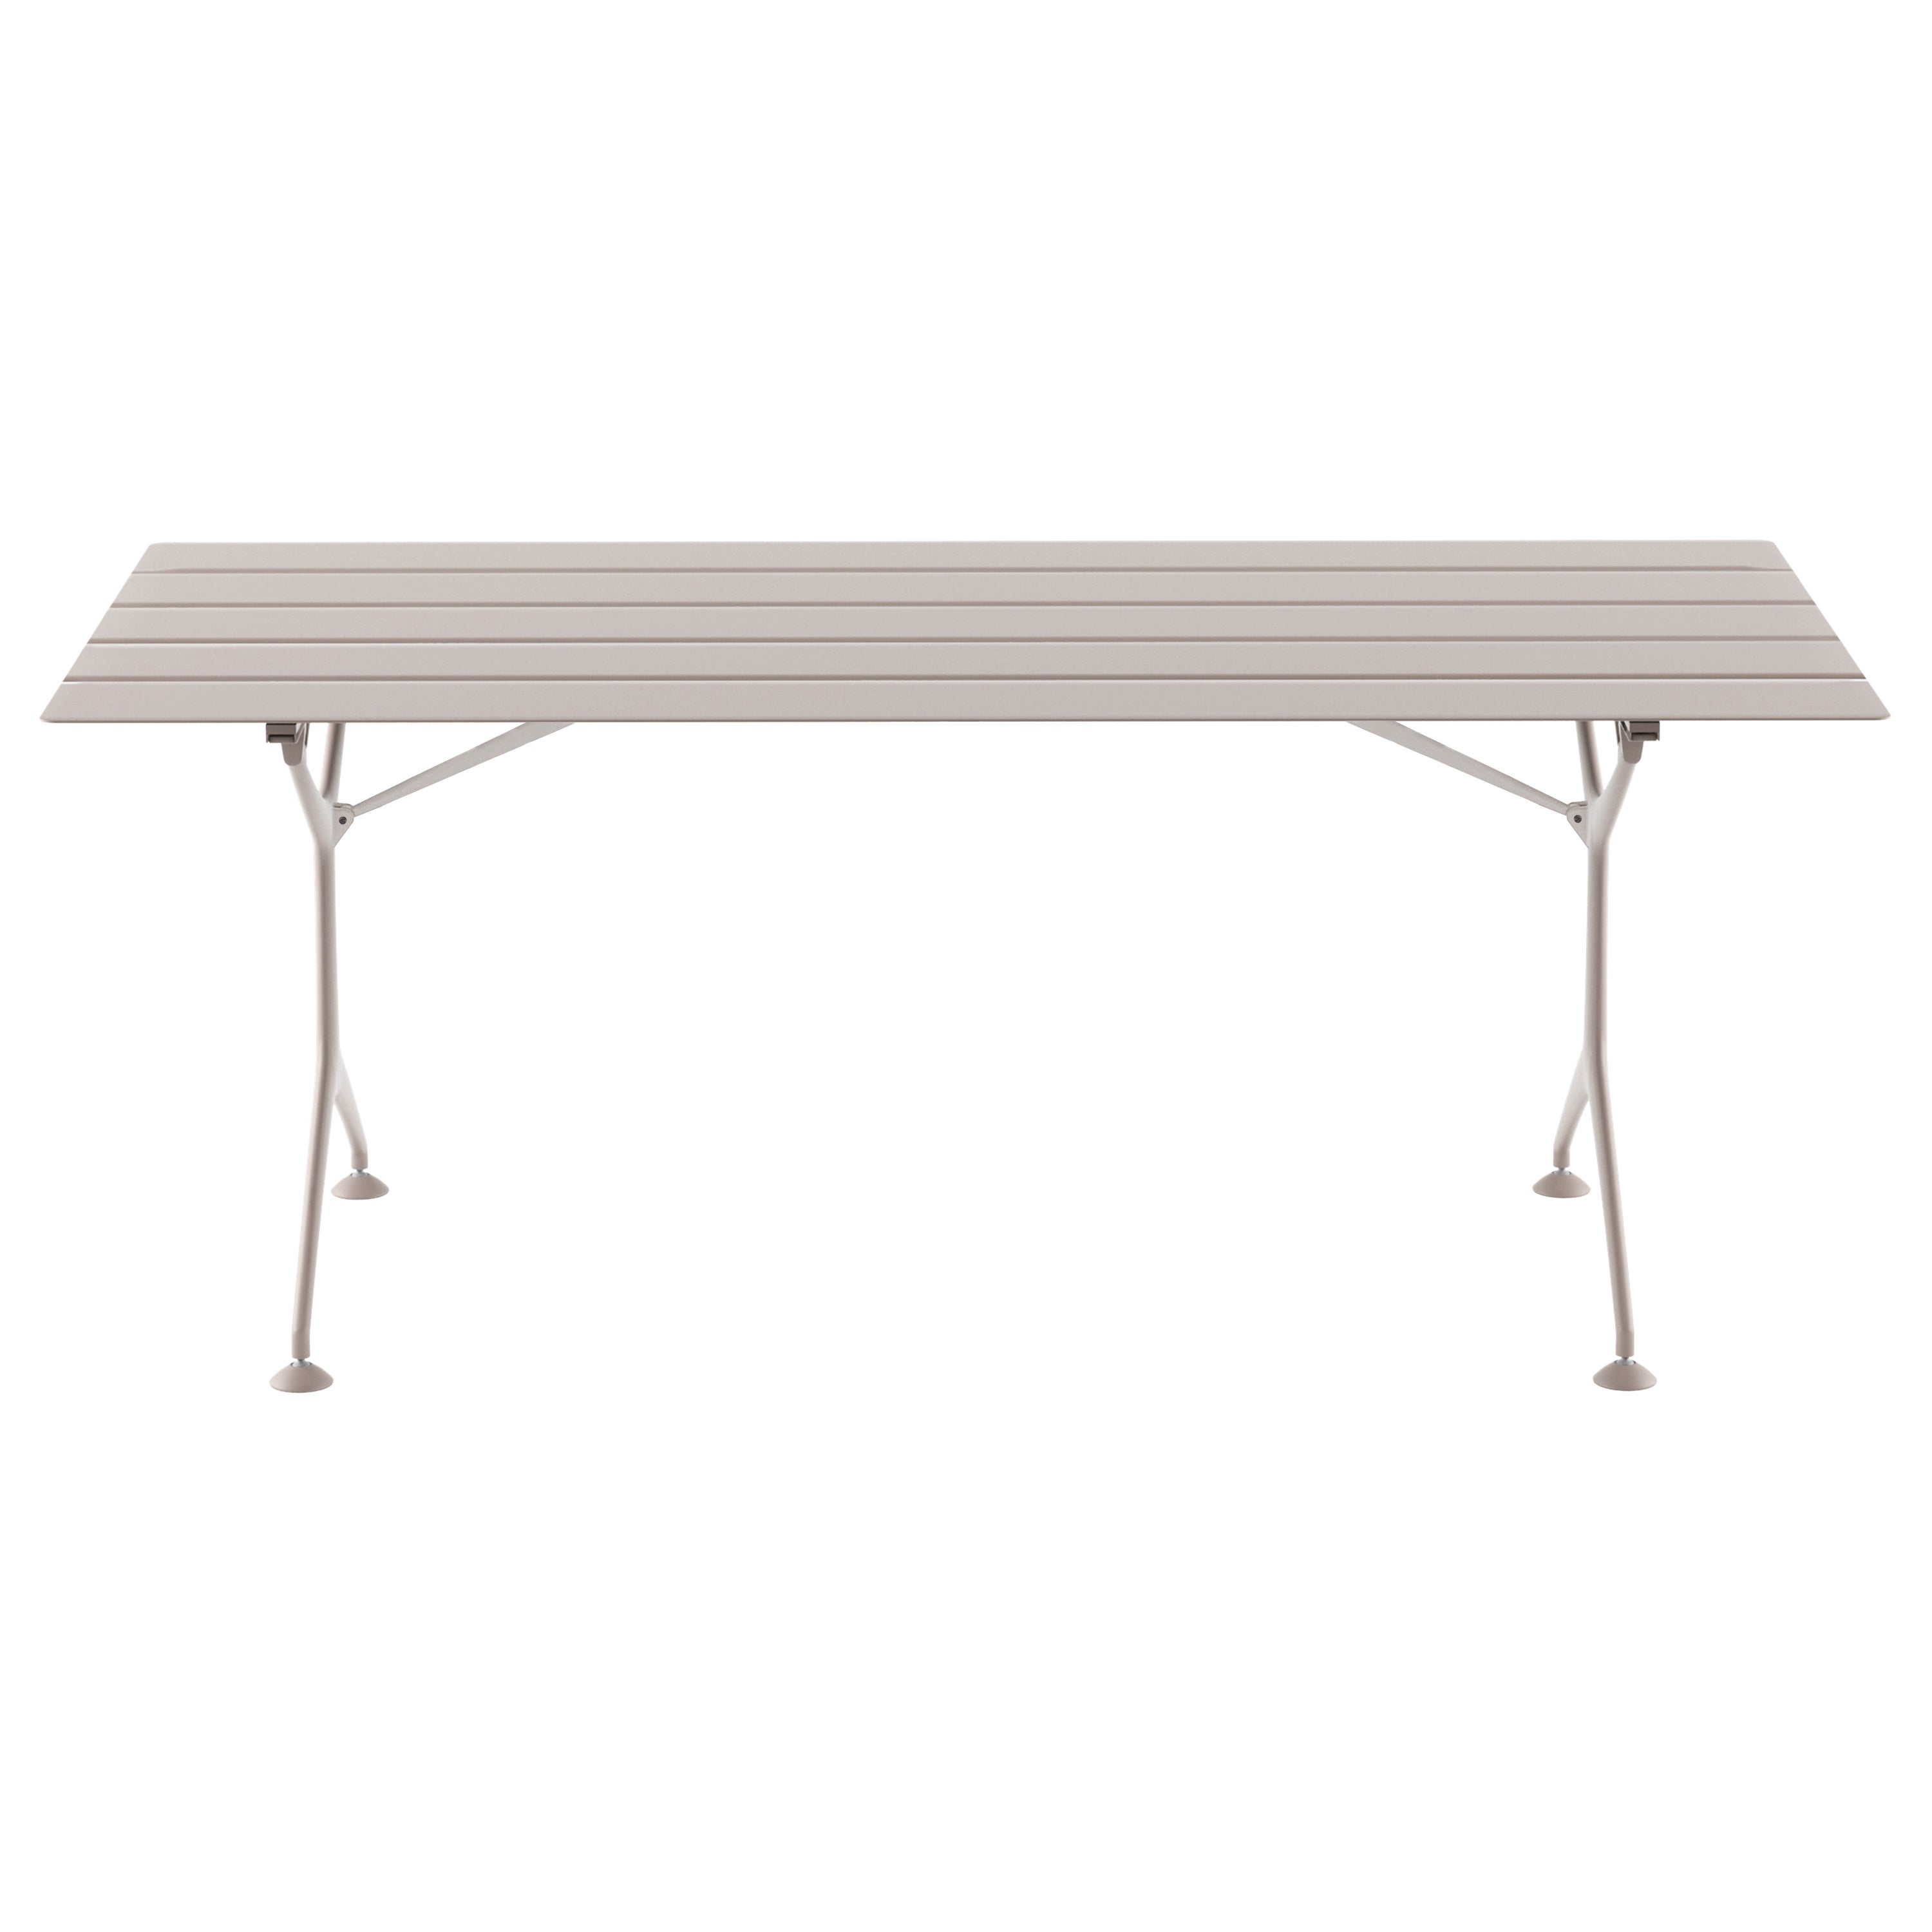 Alias 190 Outdoor Folding Frametable in Sand Lacquered Aluminum Slats For Sale